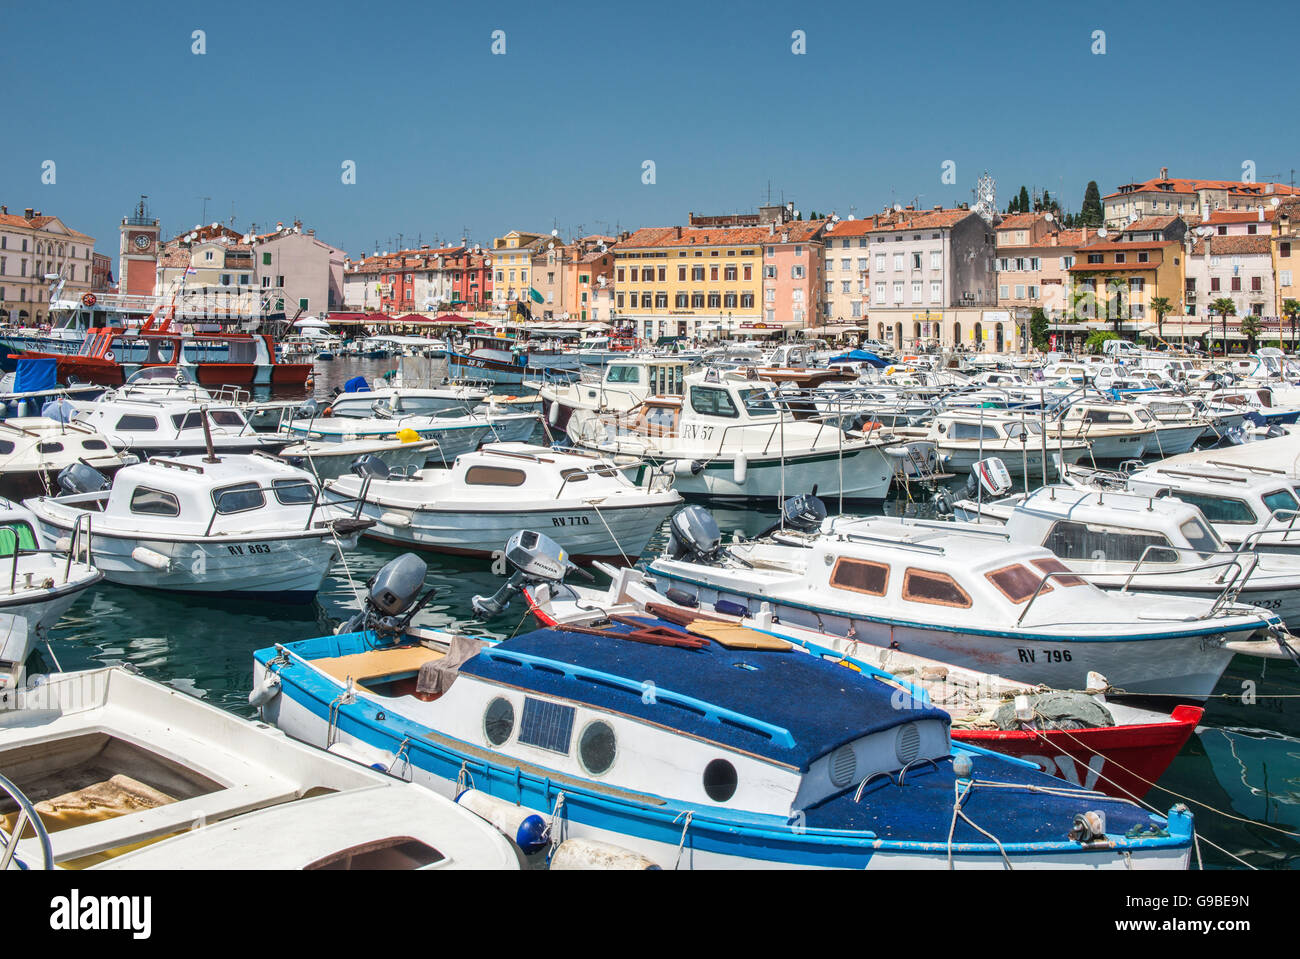 The pretty harbour town of Rovinj, or Rovigno, on the Adriatic Sea in Croatia, showing the harbour, moored boats and colourful Stock Photo